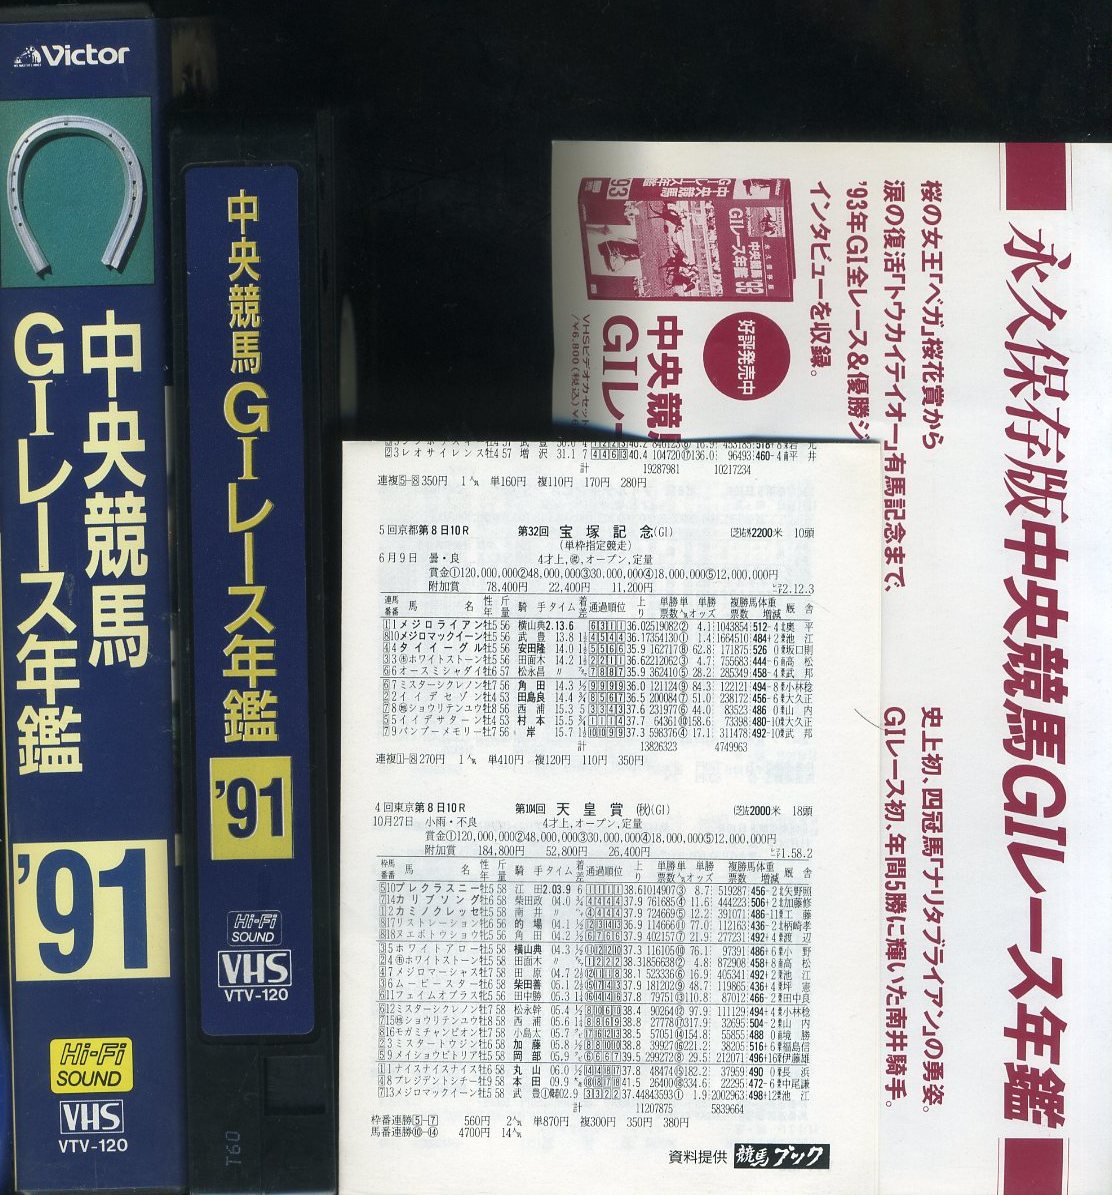  prompt decision ( including in a package welcome )VHS centre horse racing GⅠ race yearbook 91 materials attaching permanent preservation version Victor video * other great number exhibiting -641